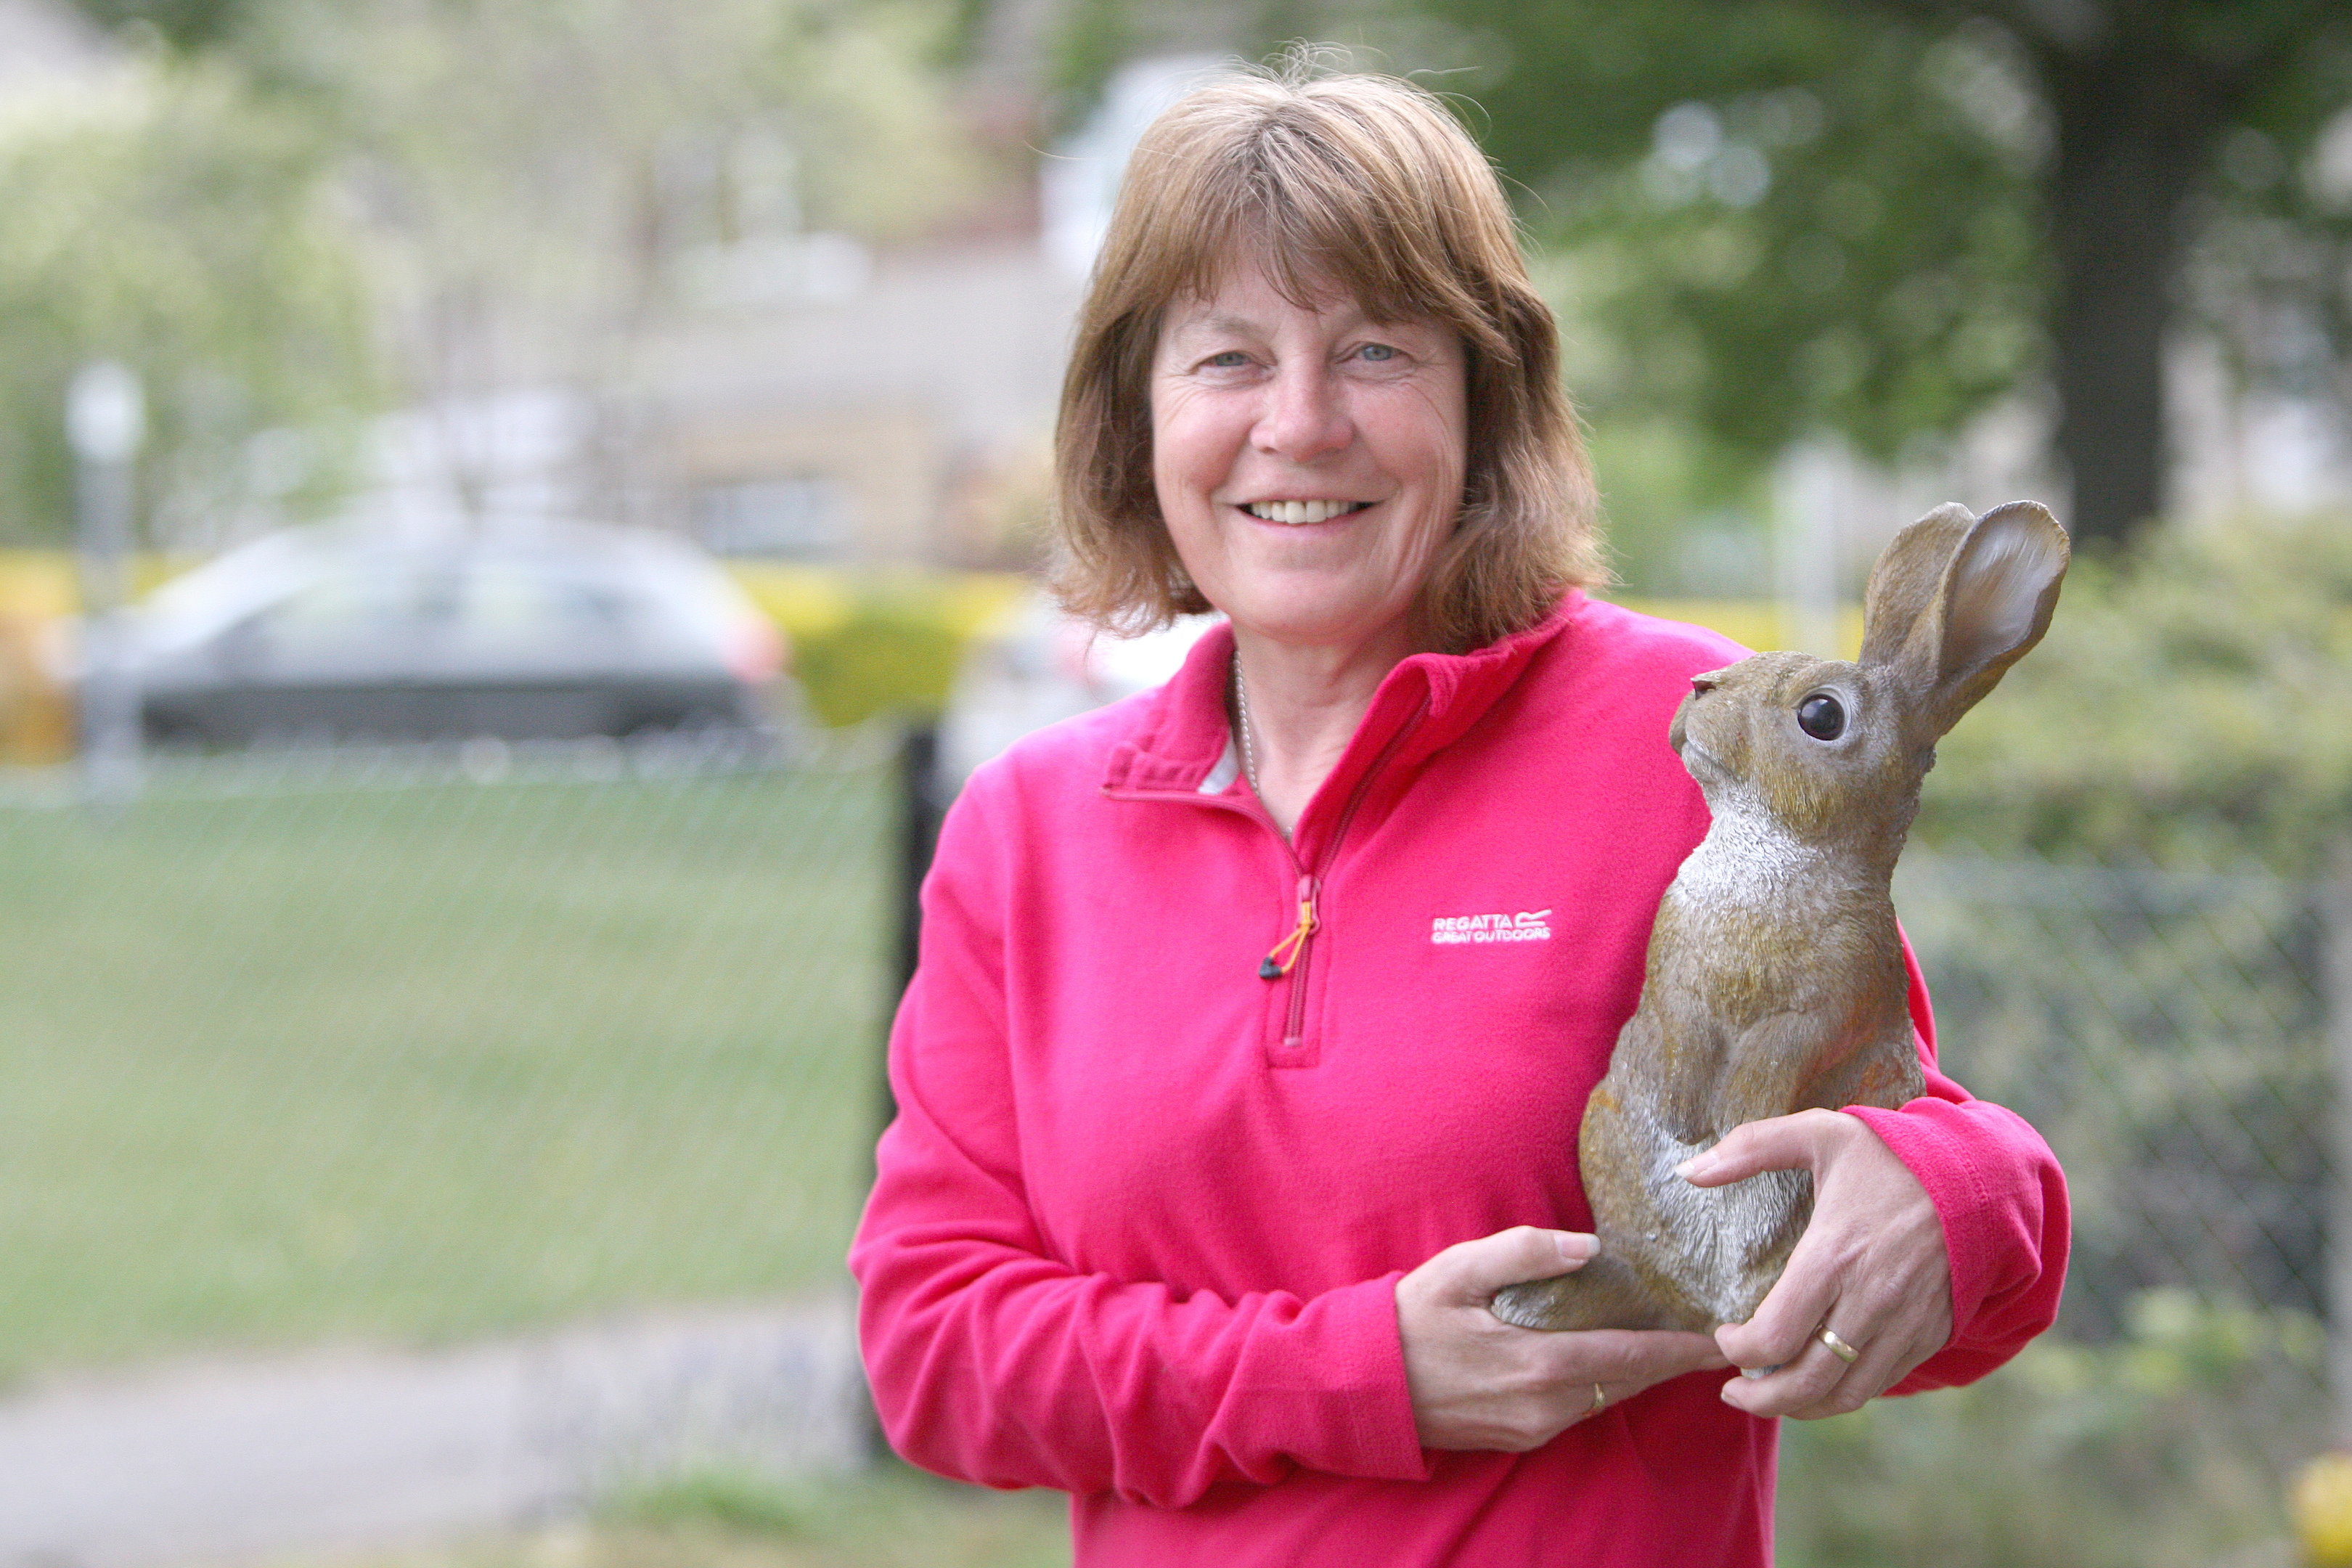 Fiona McWilliams had her rabbit ornament stolen from her garden in Perth.